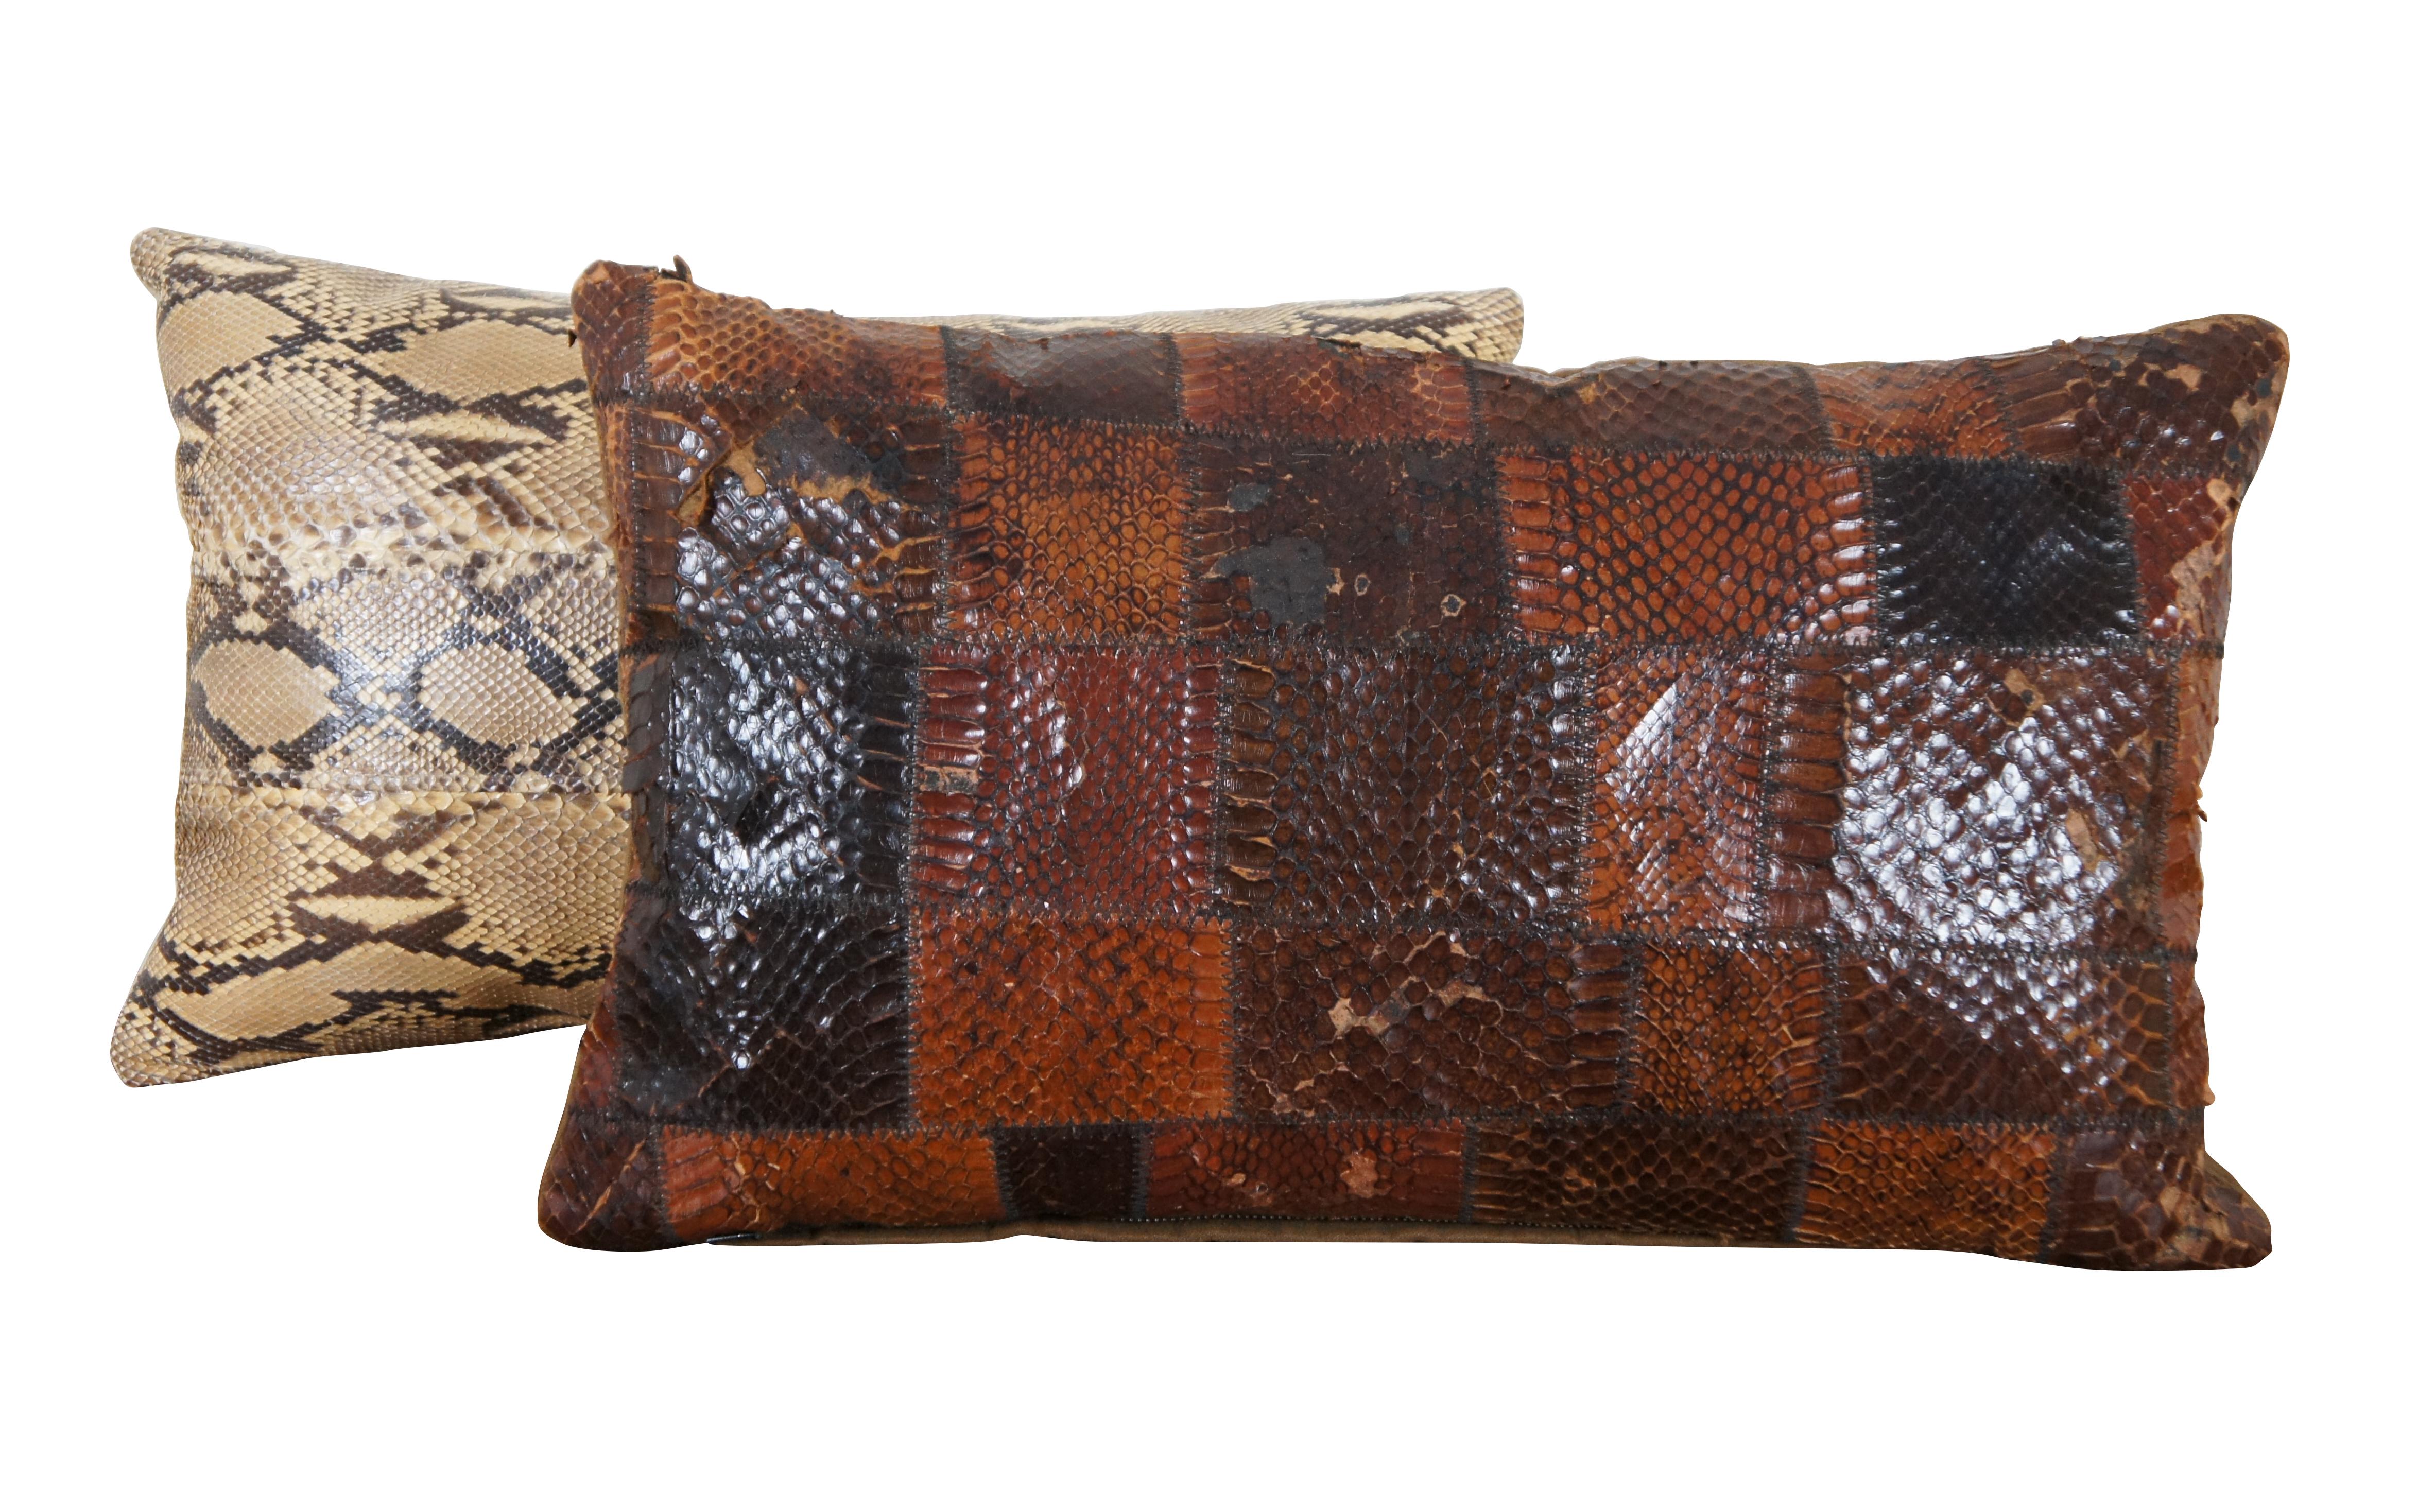 Pair of vintage polyester fiber filled, real snakeskin lumbar throw pillows, one black and cream with off-white leather back, the other a checkered patchwork piece in shades of brown with a brown fleece back.

Brown - 17” x 4” x 10” / Cream - 15”